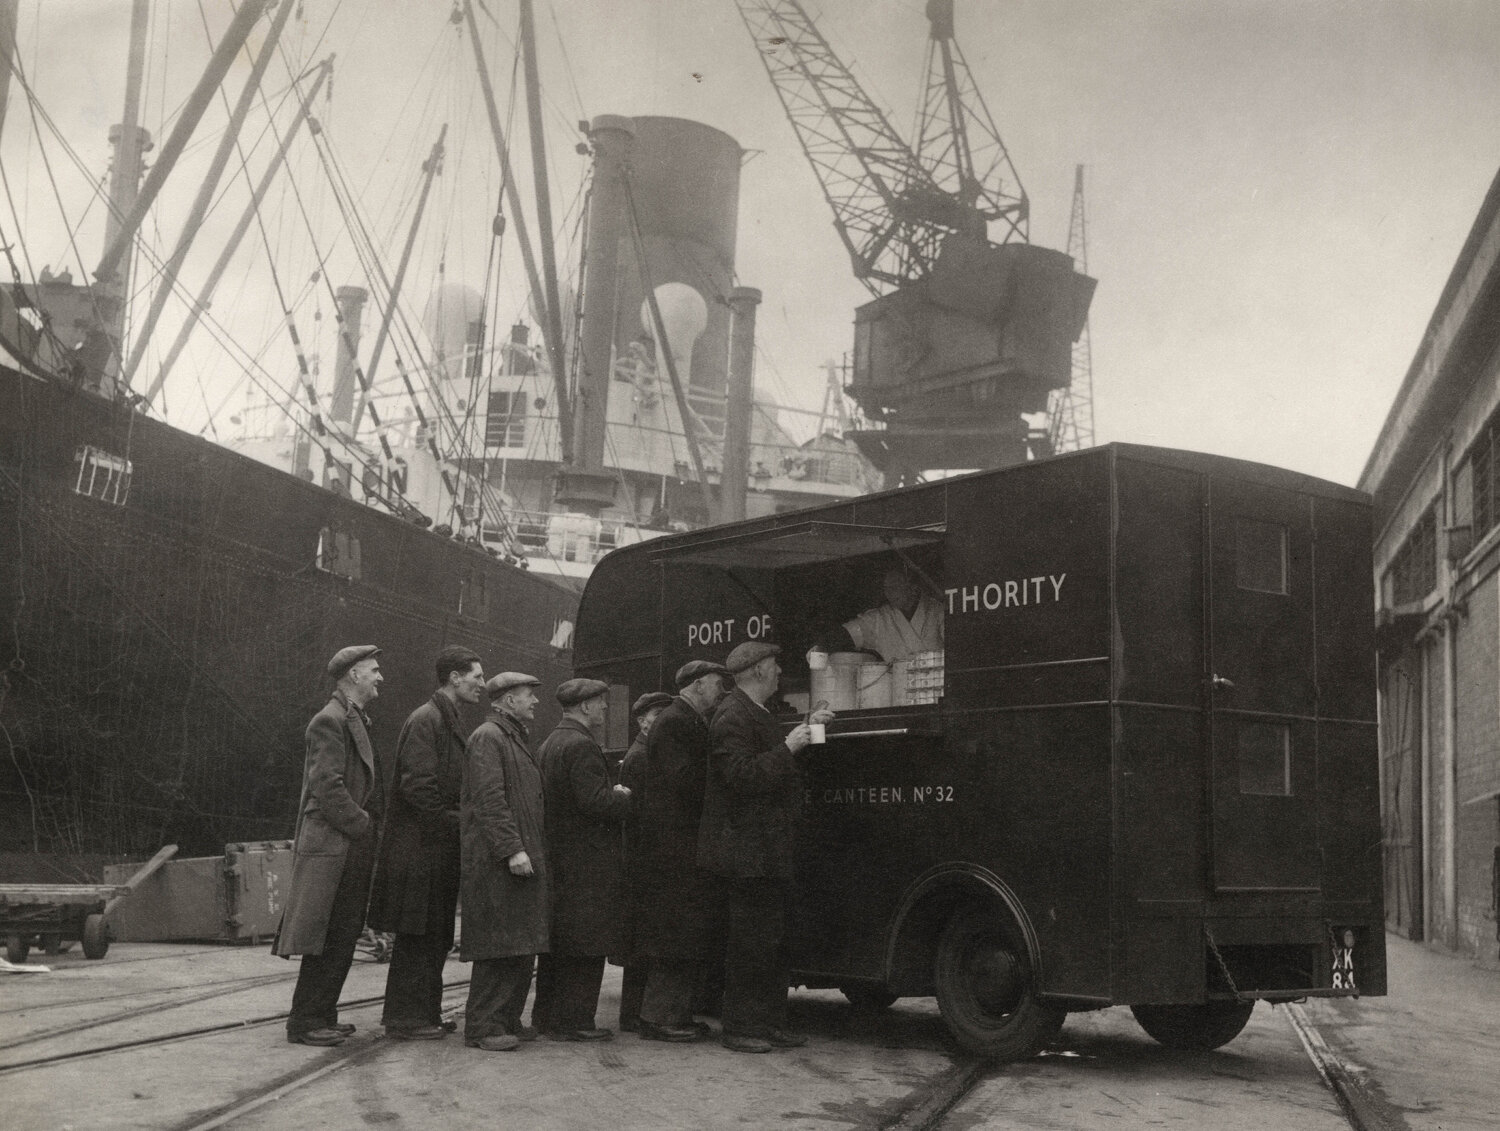 Staff of the Port of London’s Mobile Canteen No.32 dispense tea to queuing dockers, 1942